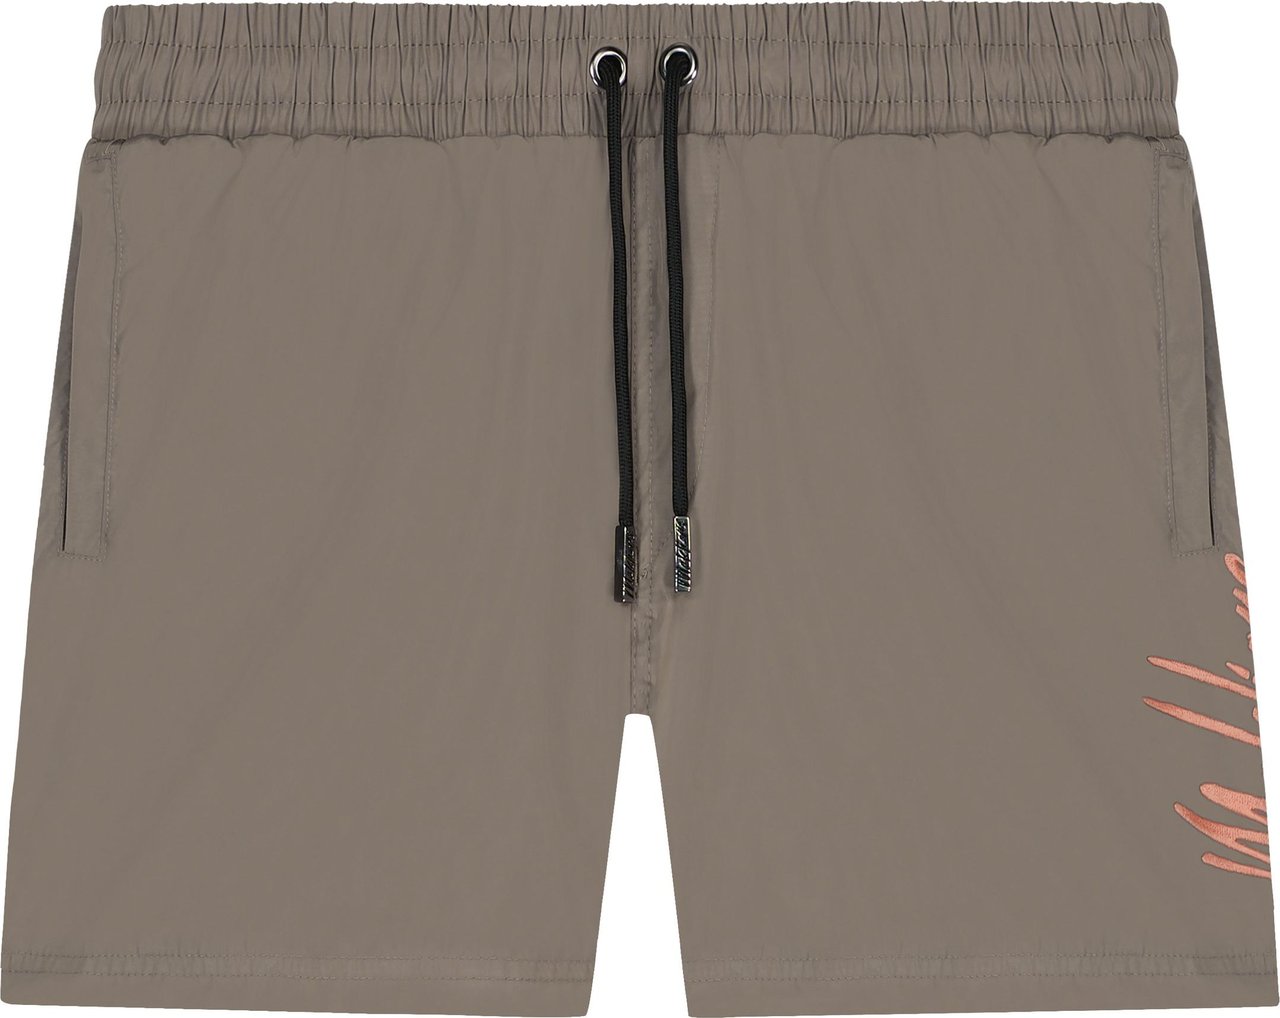 Malelions Signature Swimshort - Taupe/Peach Taupe